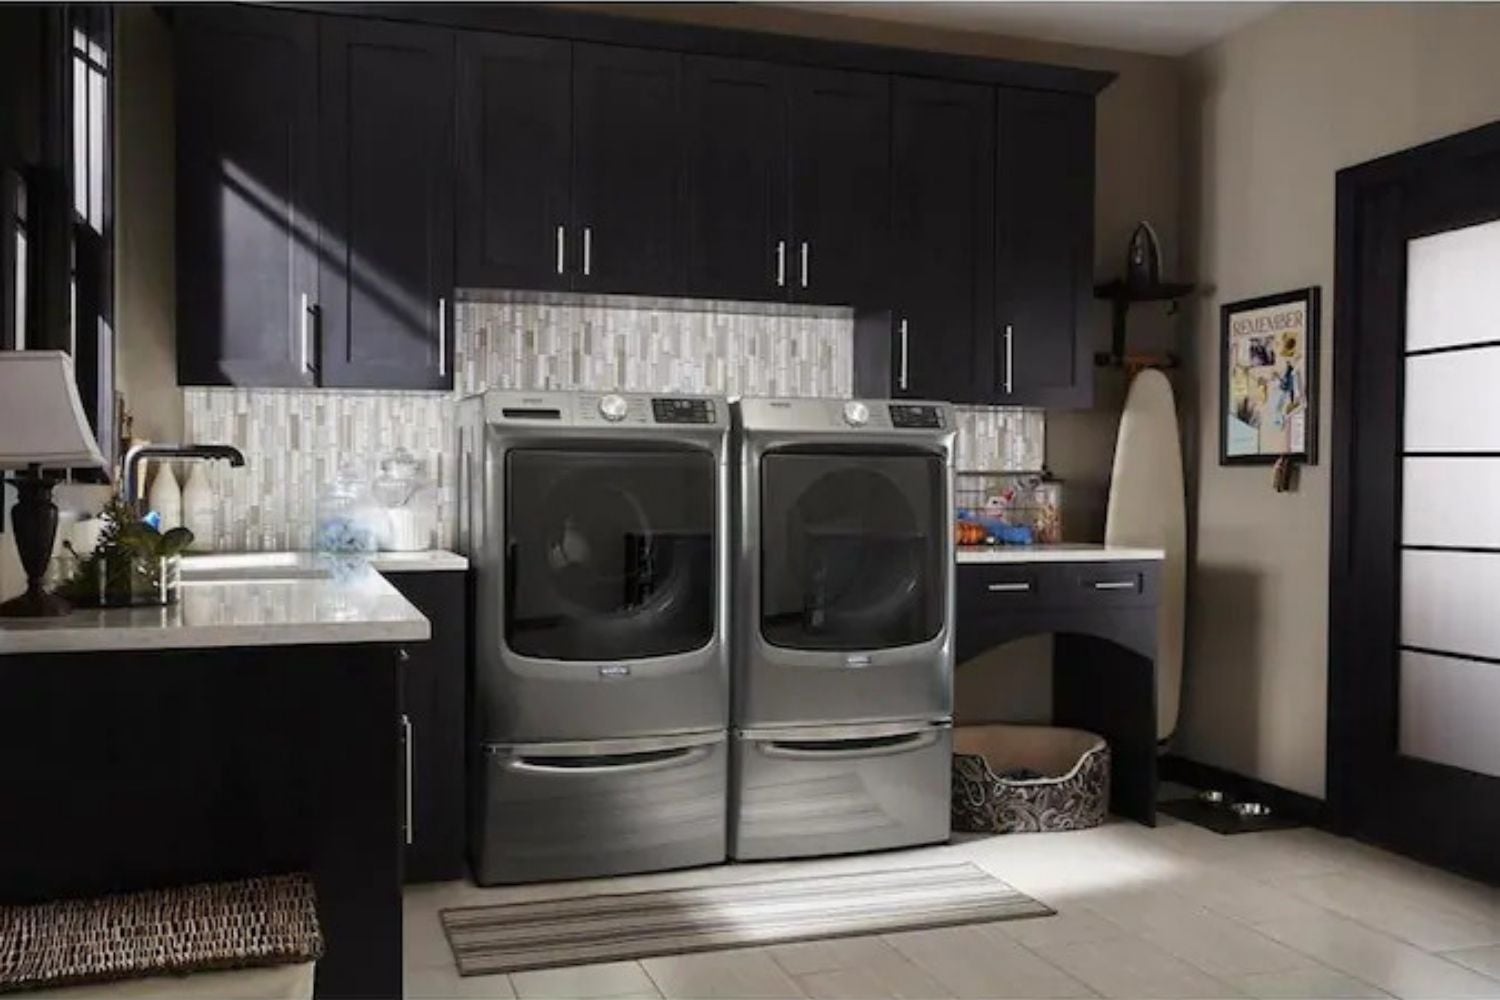 The Best Washer And Dryer Black Friday Deals 2020 Savings On Lg Samsung Ge And More